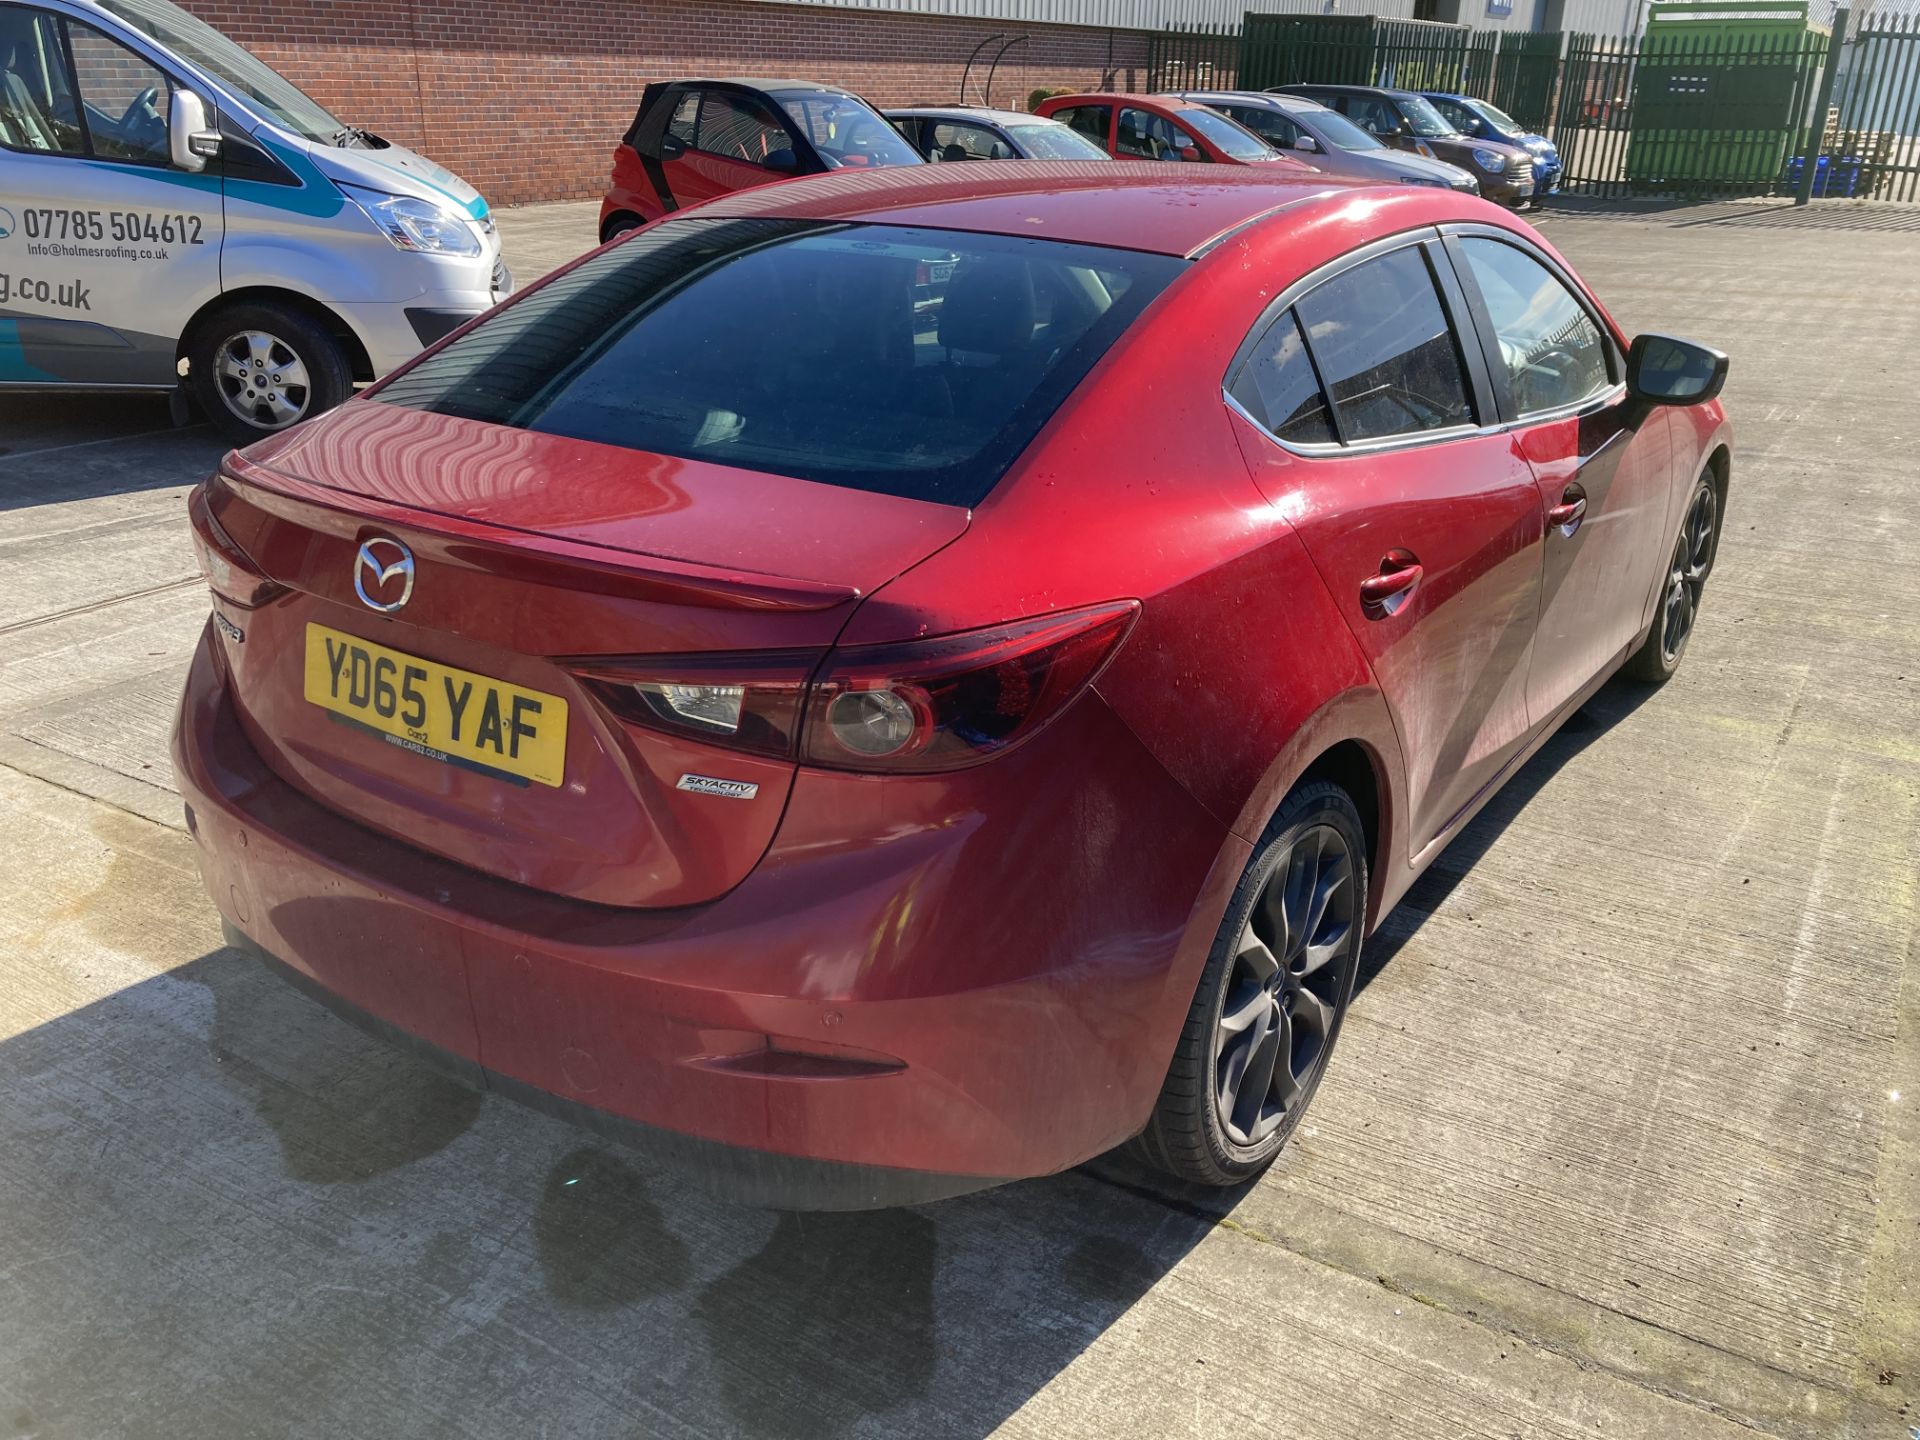 MAZDA 3 SPORT NAV 2.0 four door saloon - petrol - red with black leather interior. - Image 22 of 27